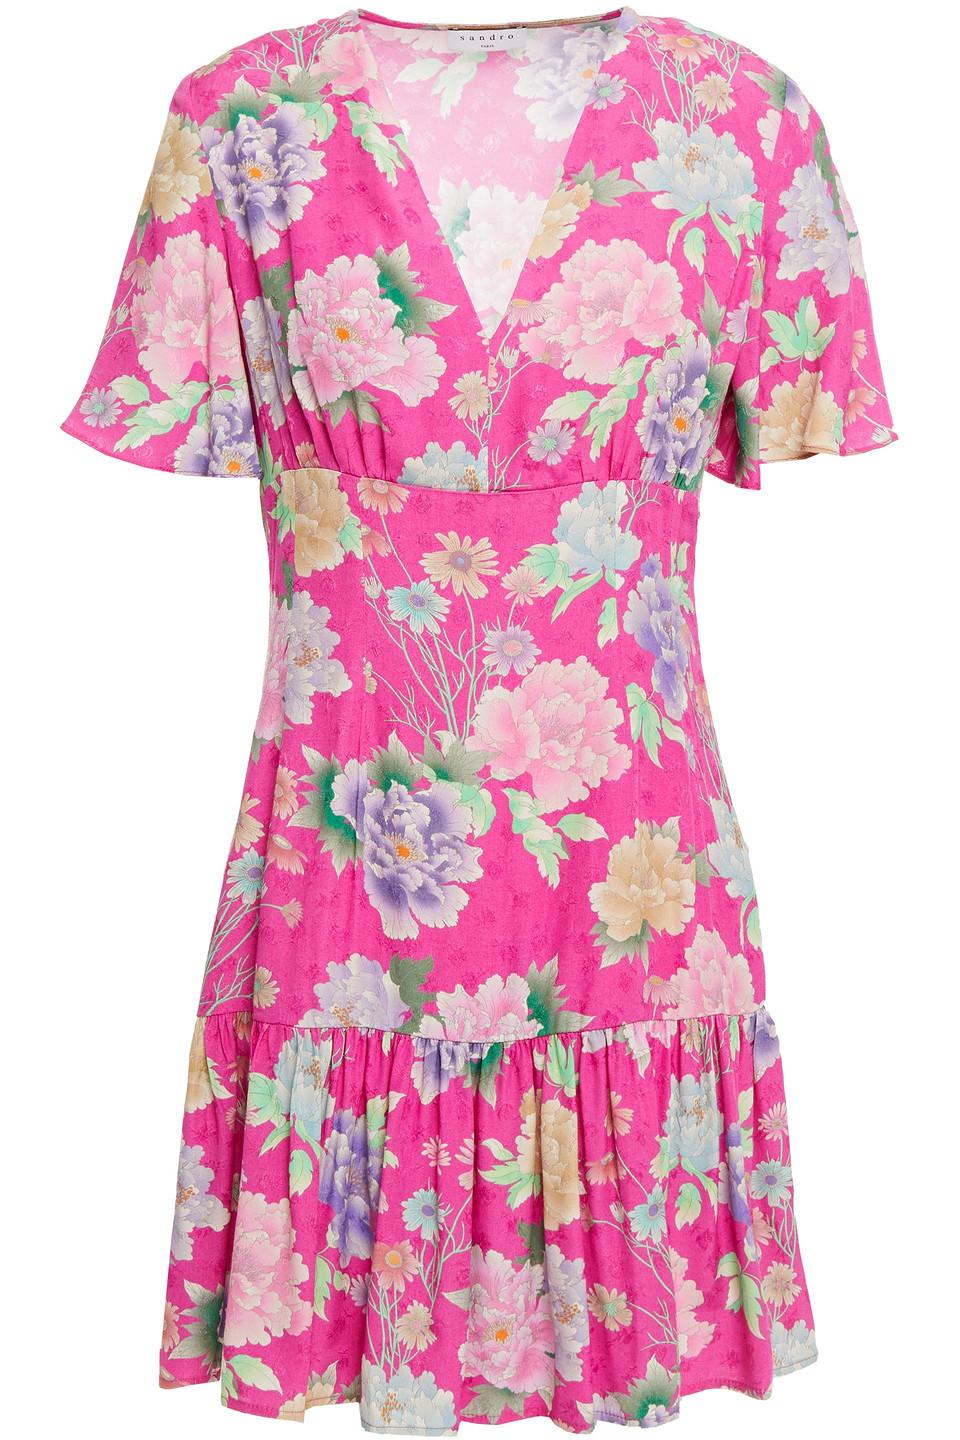 Sandro Synthetic Gathered Floral-jacquard Mini Dress in Bright Pink 